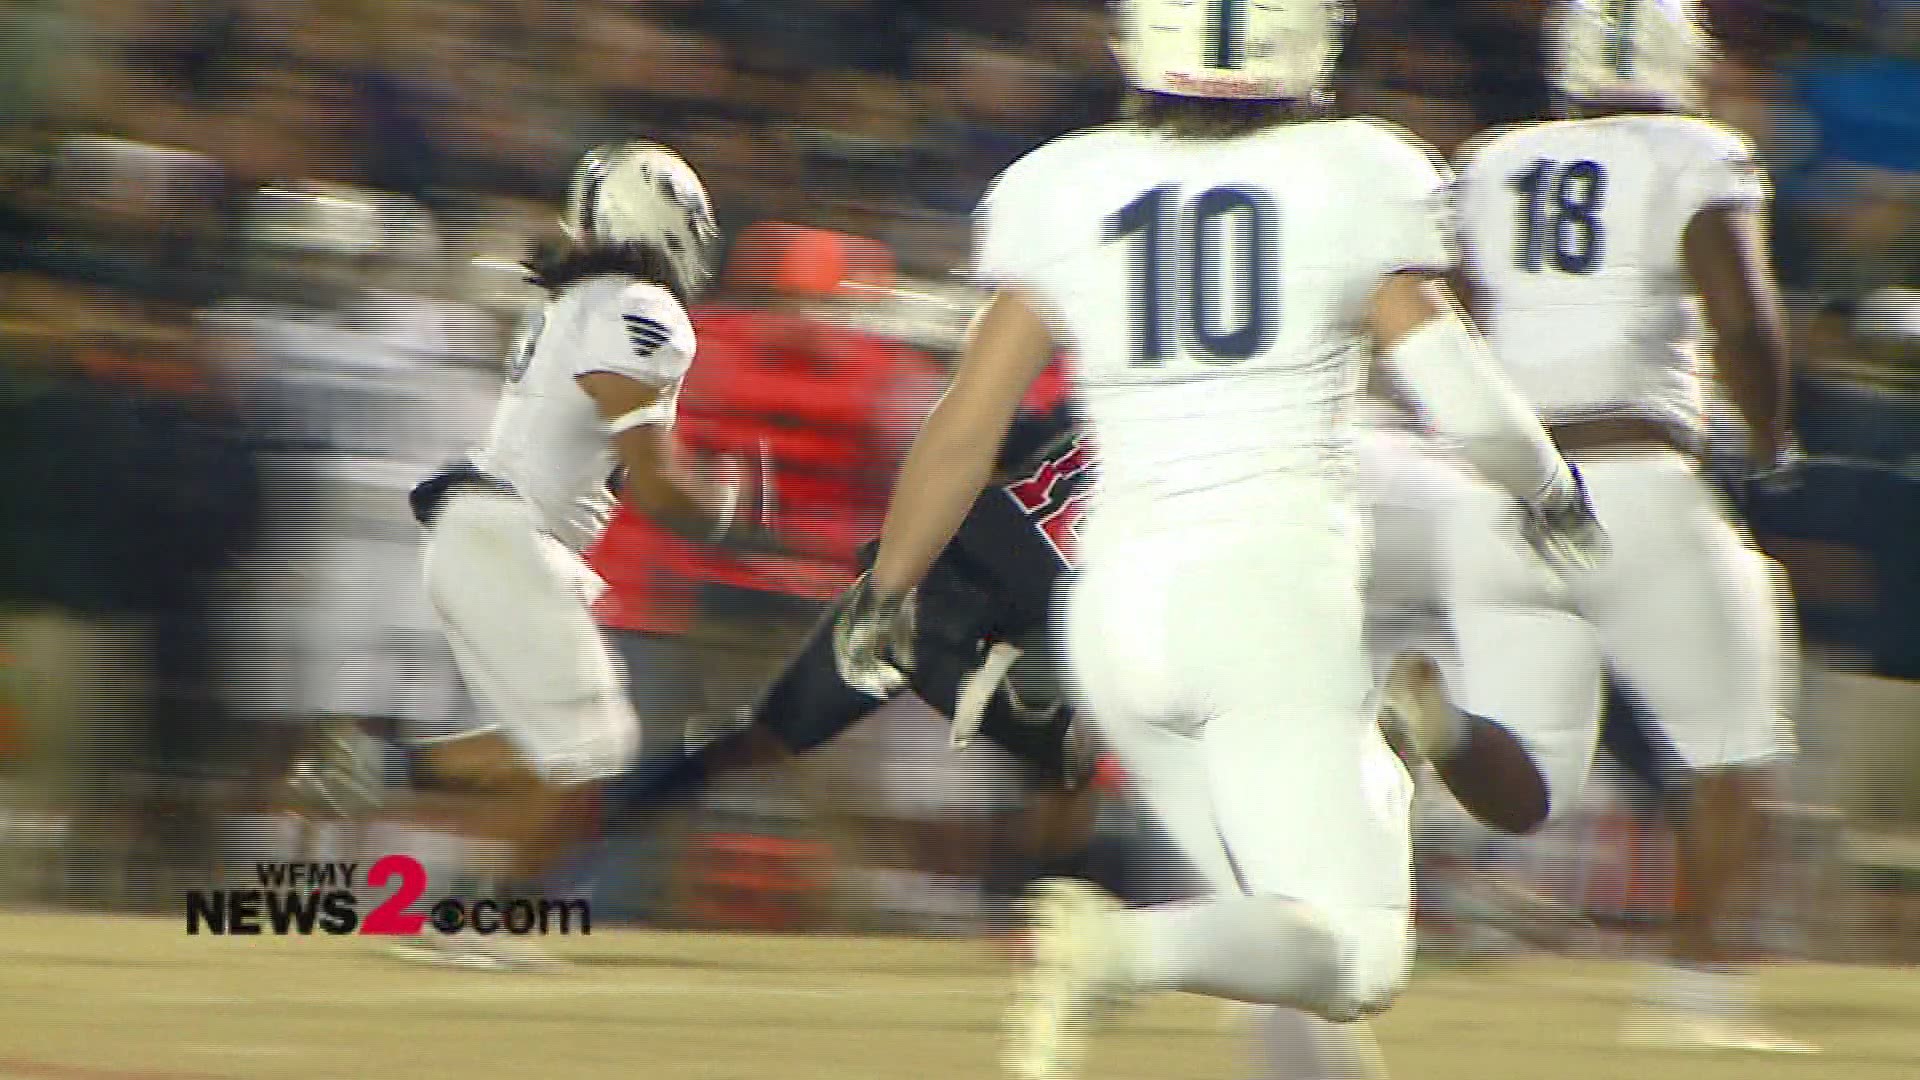 Grimsley Beats Page 32-17 For First Win Over The Pirates Since 2006